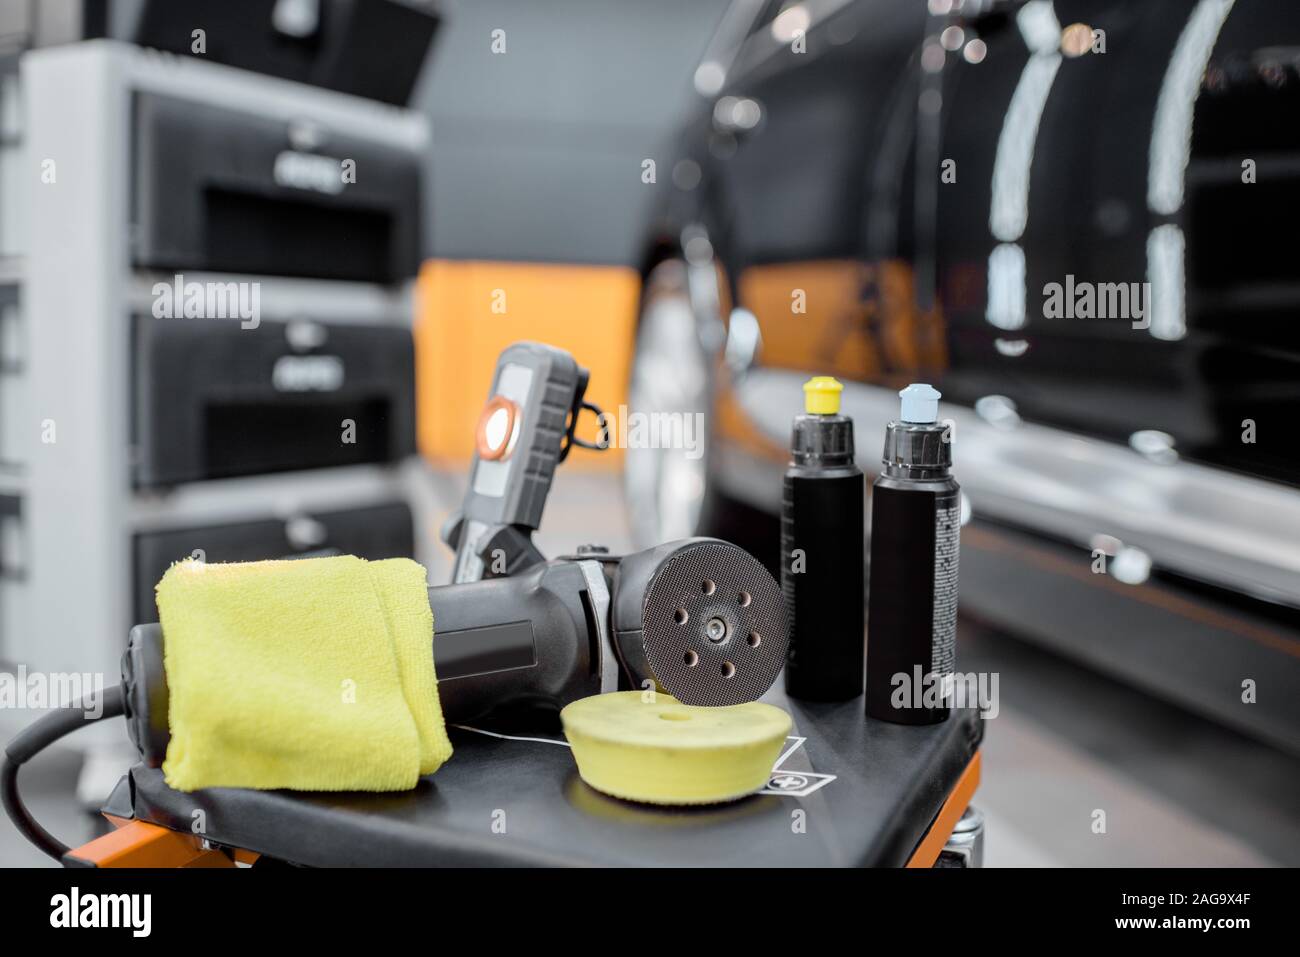 Professional equipment for automotive body polishing at the car service. Car detailing tools for vehicle care Stock Photo